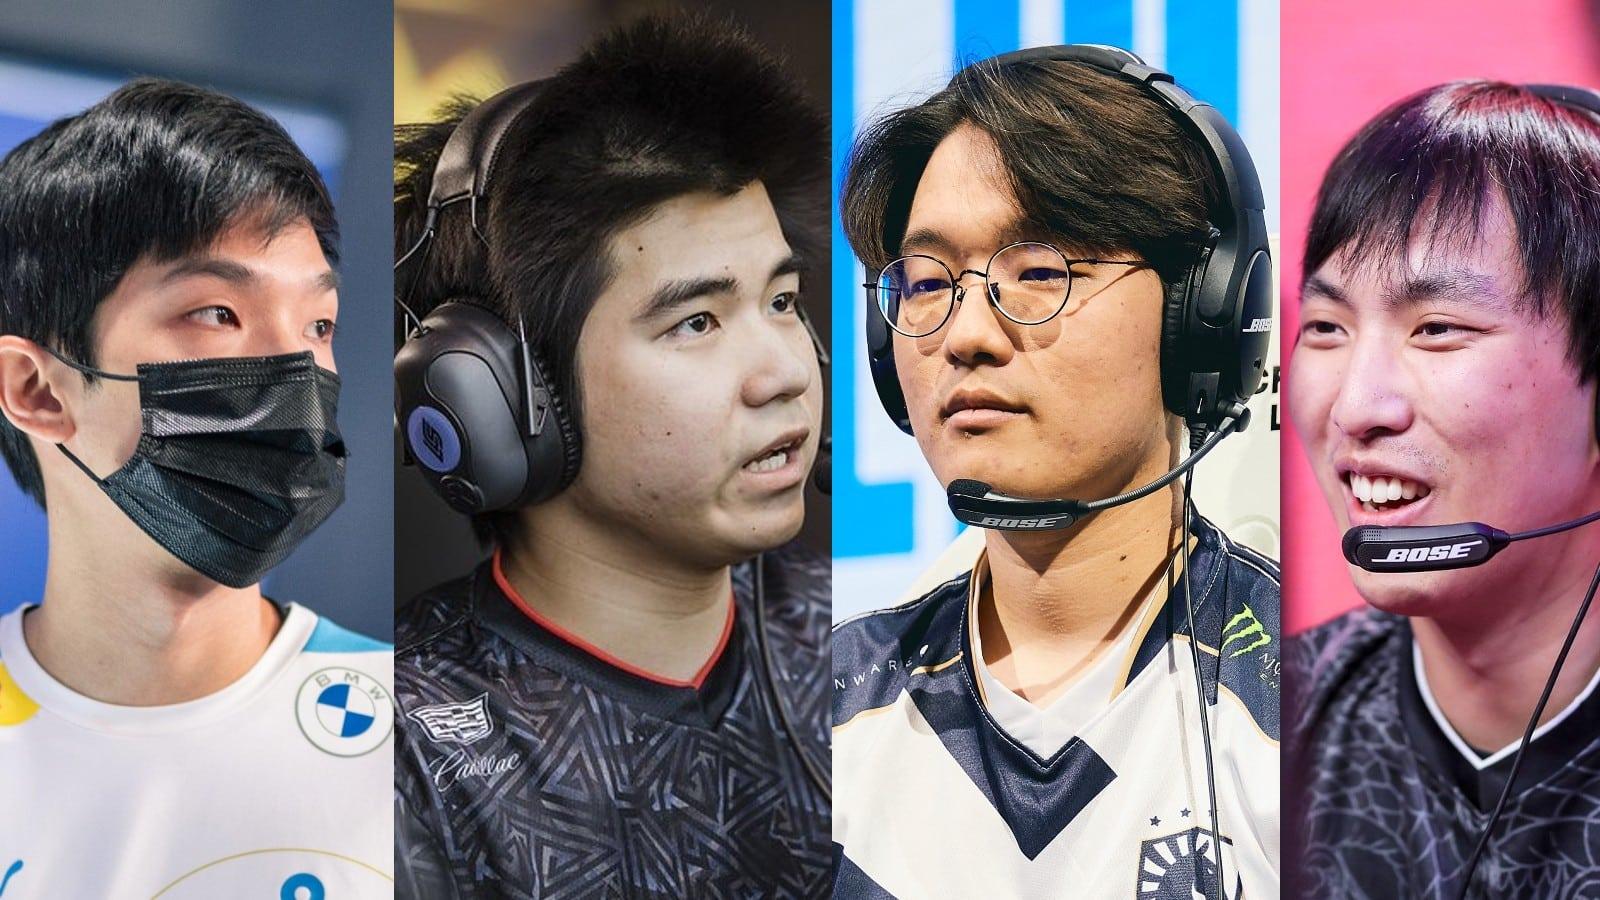 Images of Blaber, Spica, and Doublelift